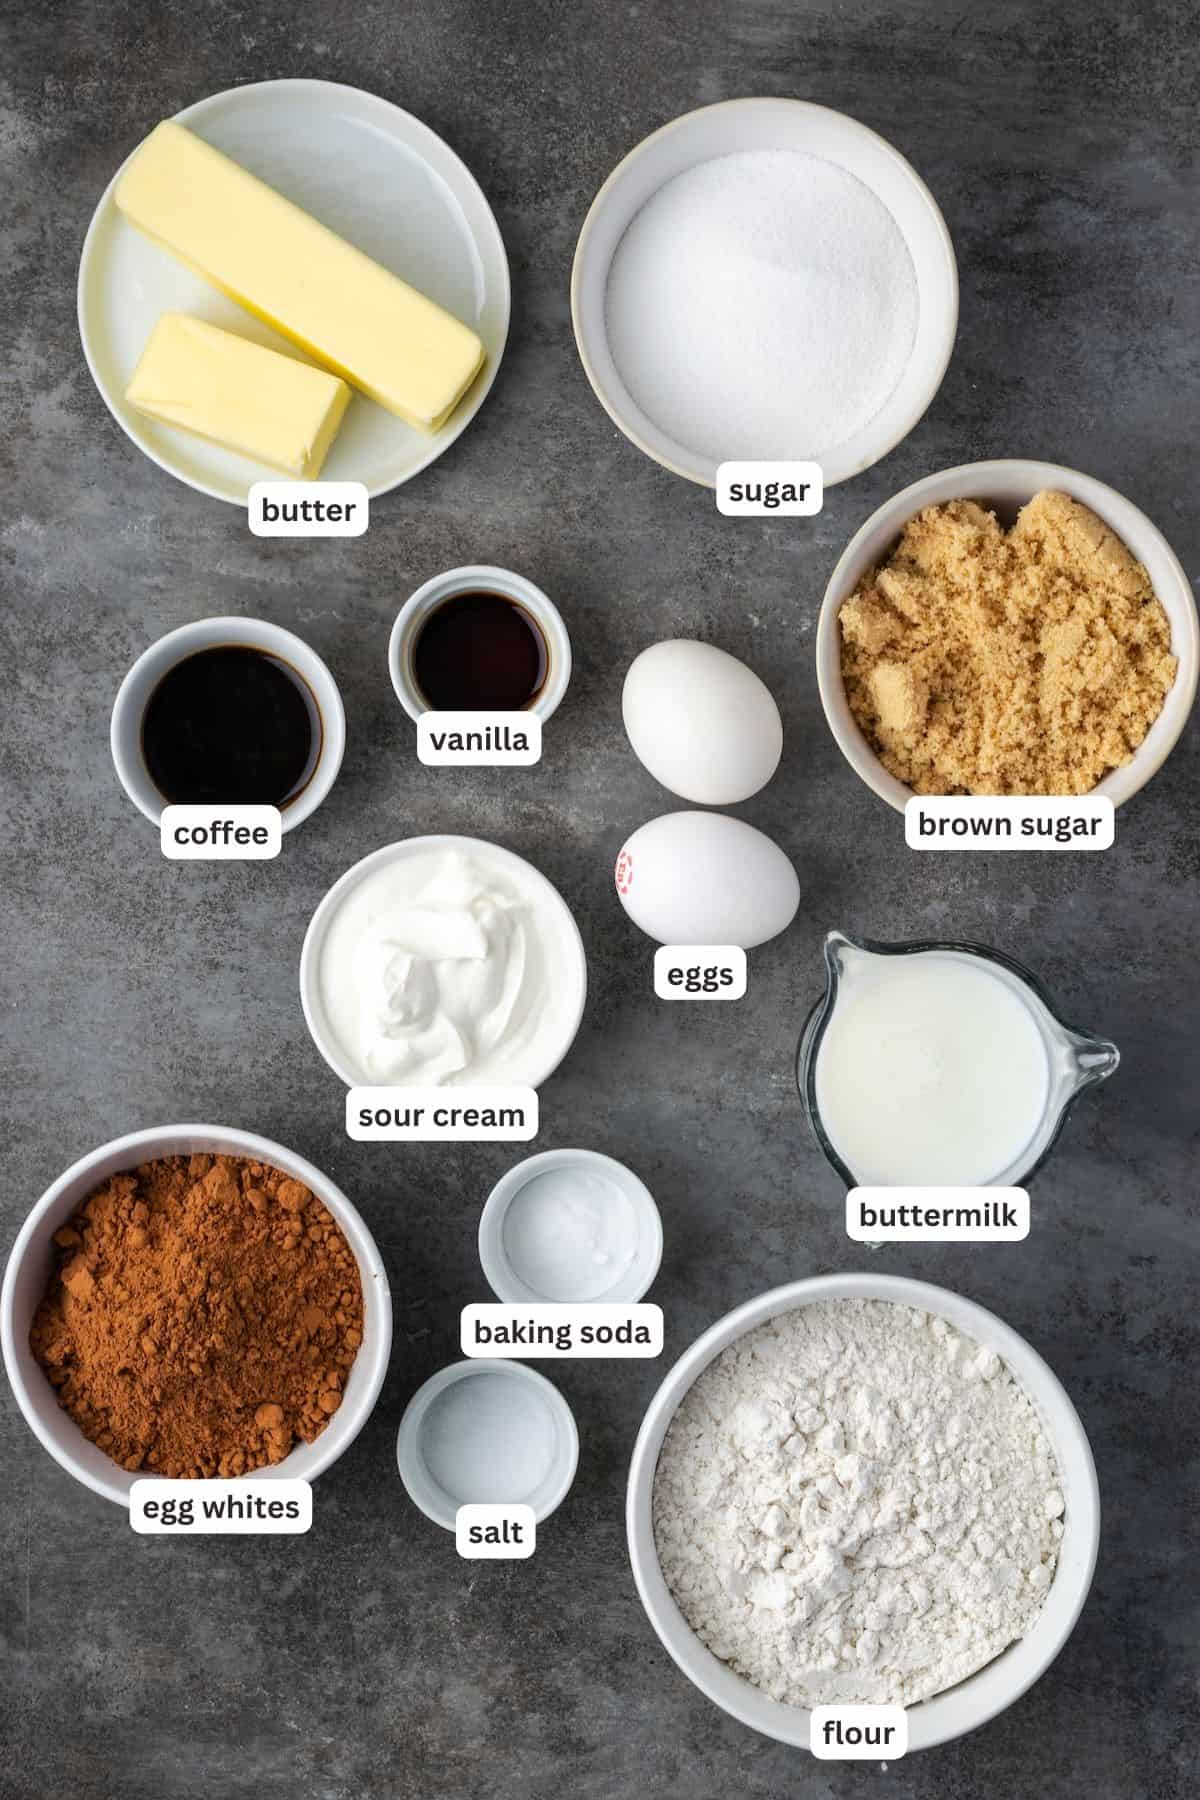 Cookies and cream cake ingredients with text labels overlaying each ingredient.